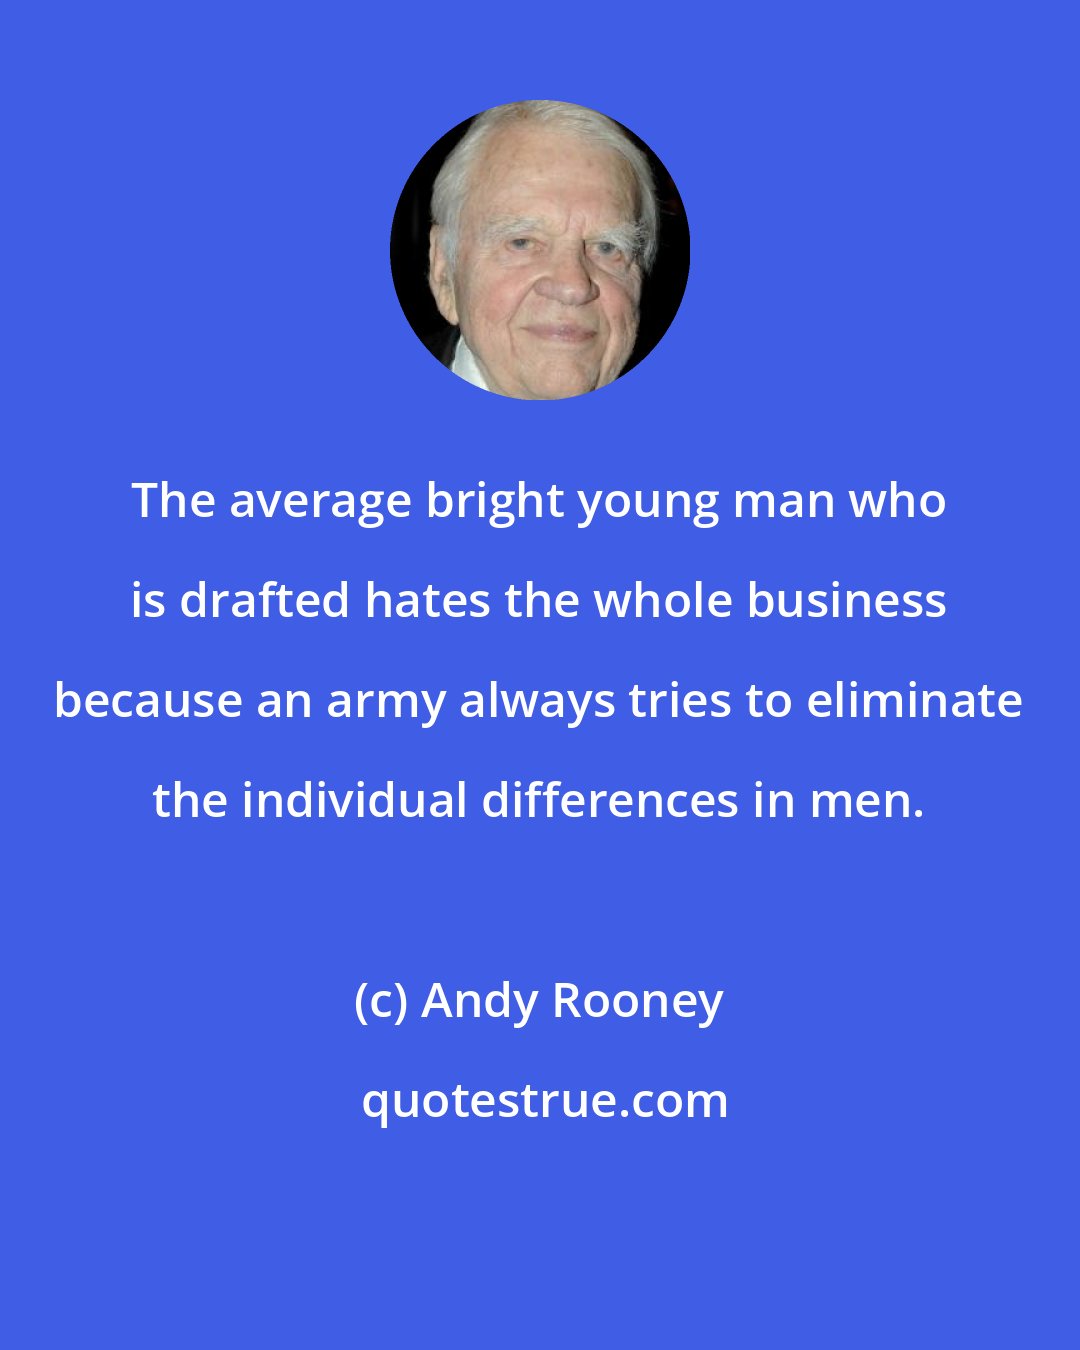 Andy Rooney: The average bright young man who is drafted hates the whole business because an army always tries to eliminate the individual differences in men.